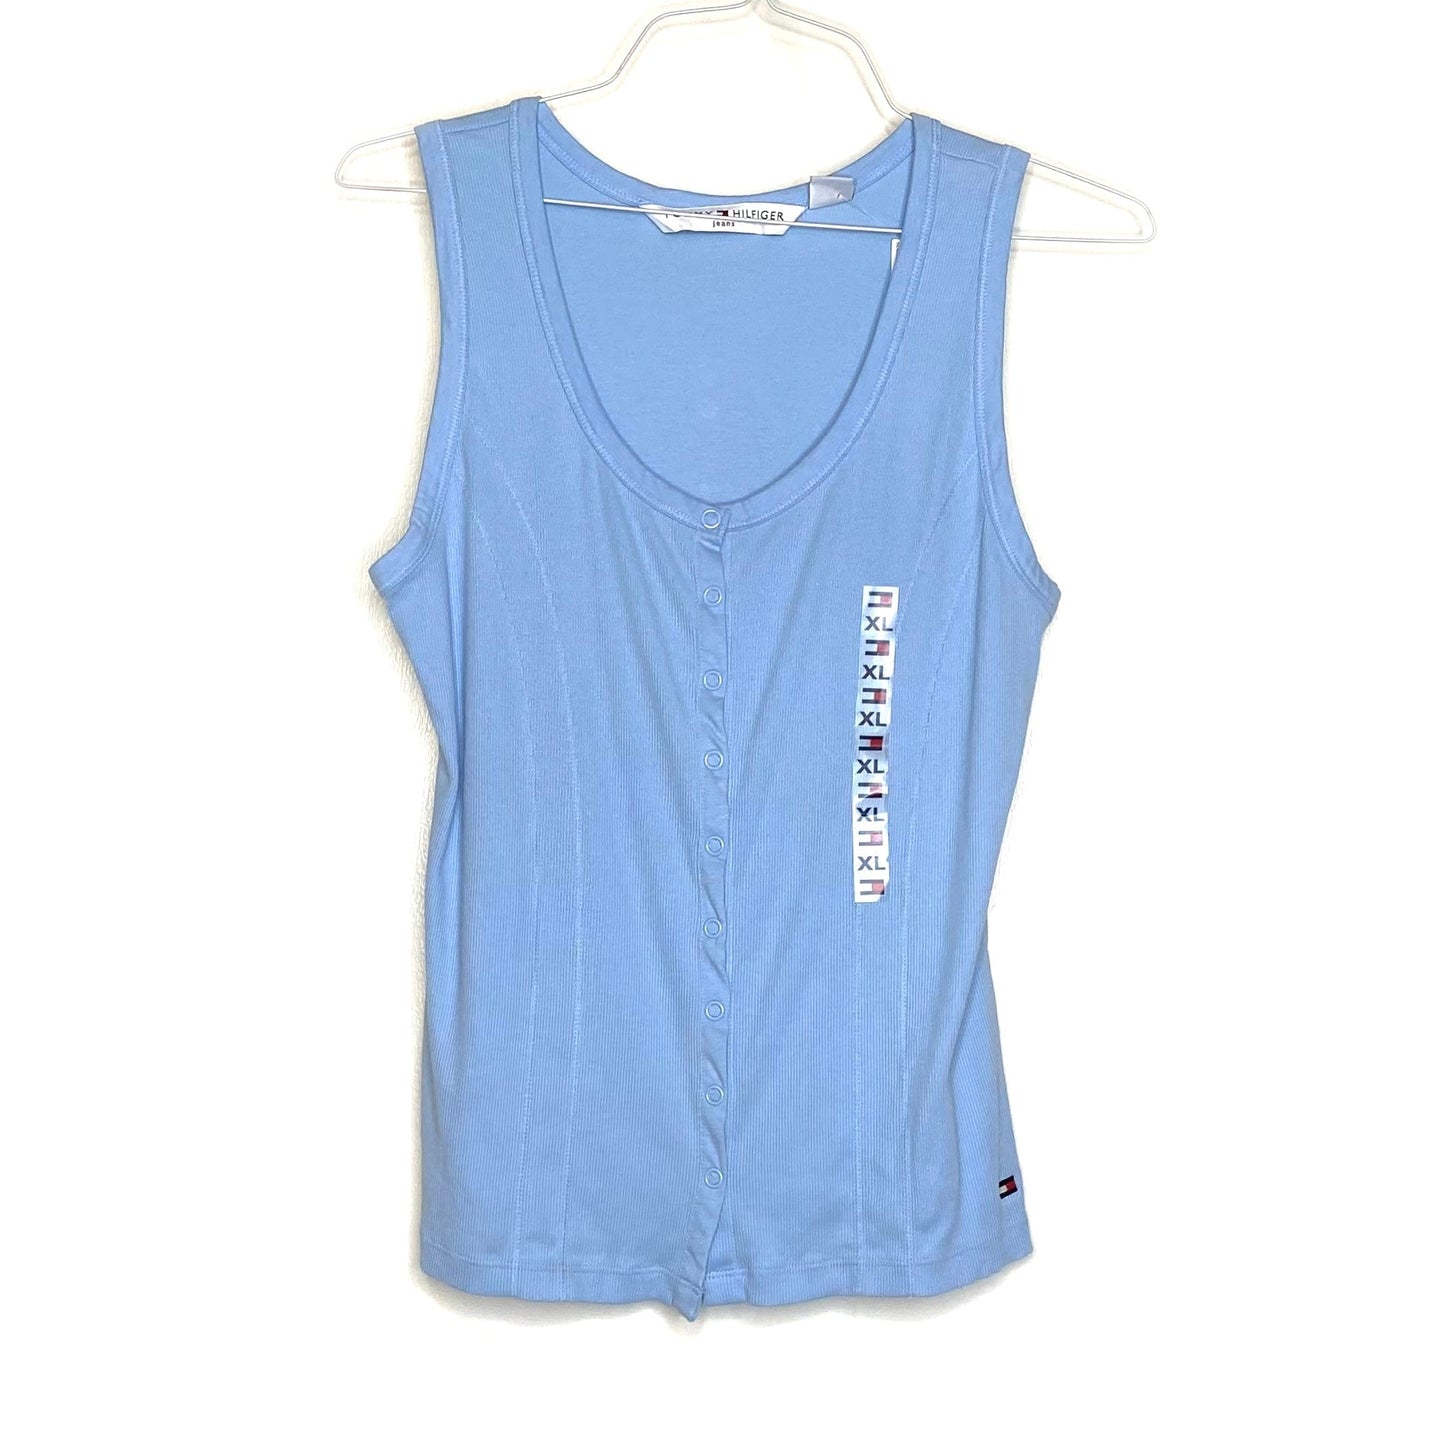 Tommy Hilfiger Womens Size XL Light Blue Snap-Front Tank Top Ribbed NWT